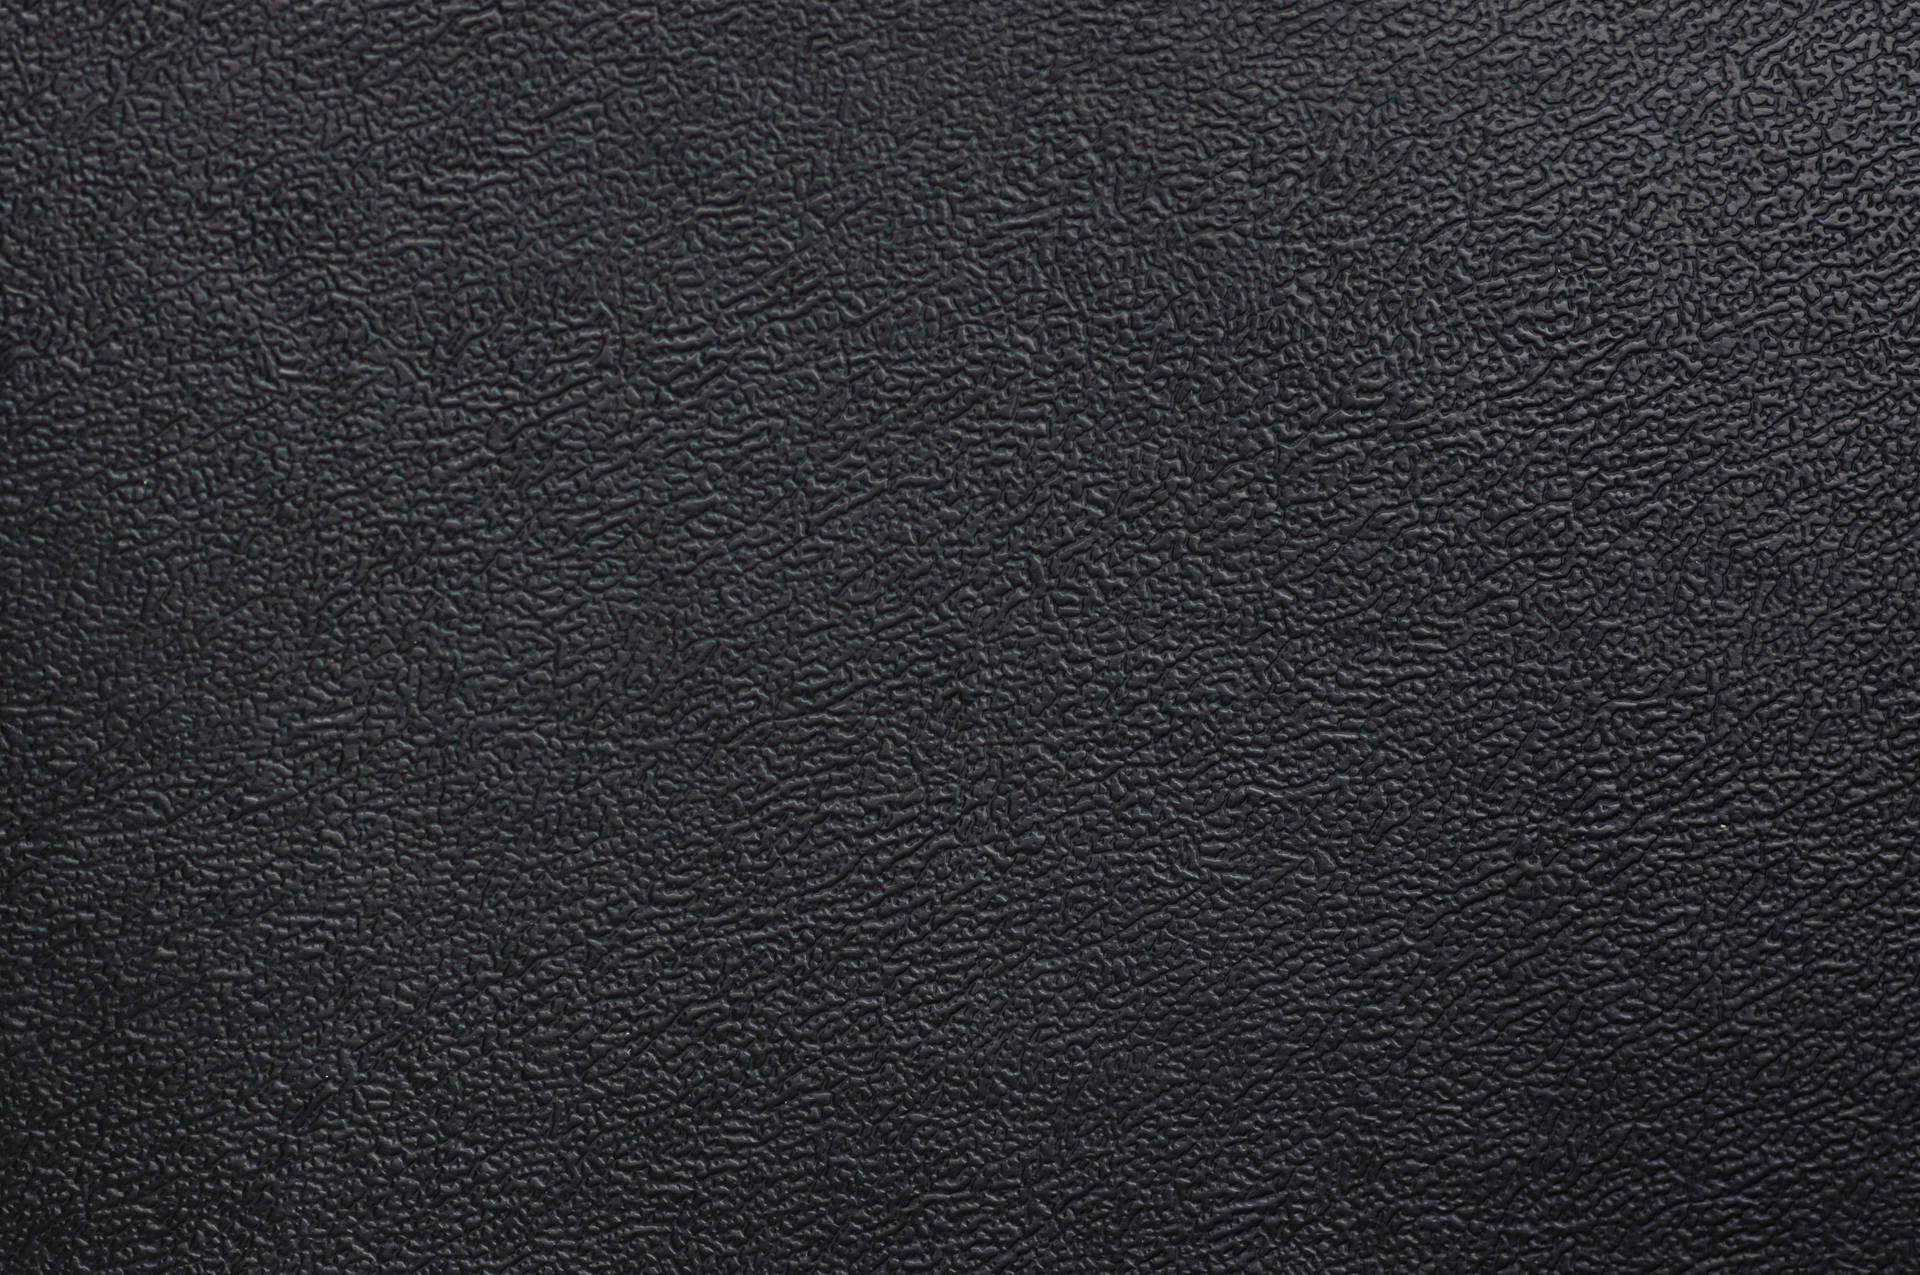 Textured Black Leather Wallpaper